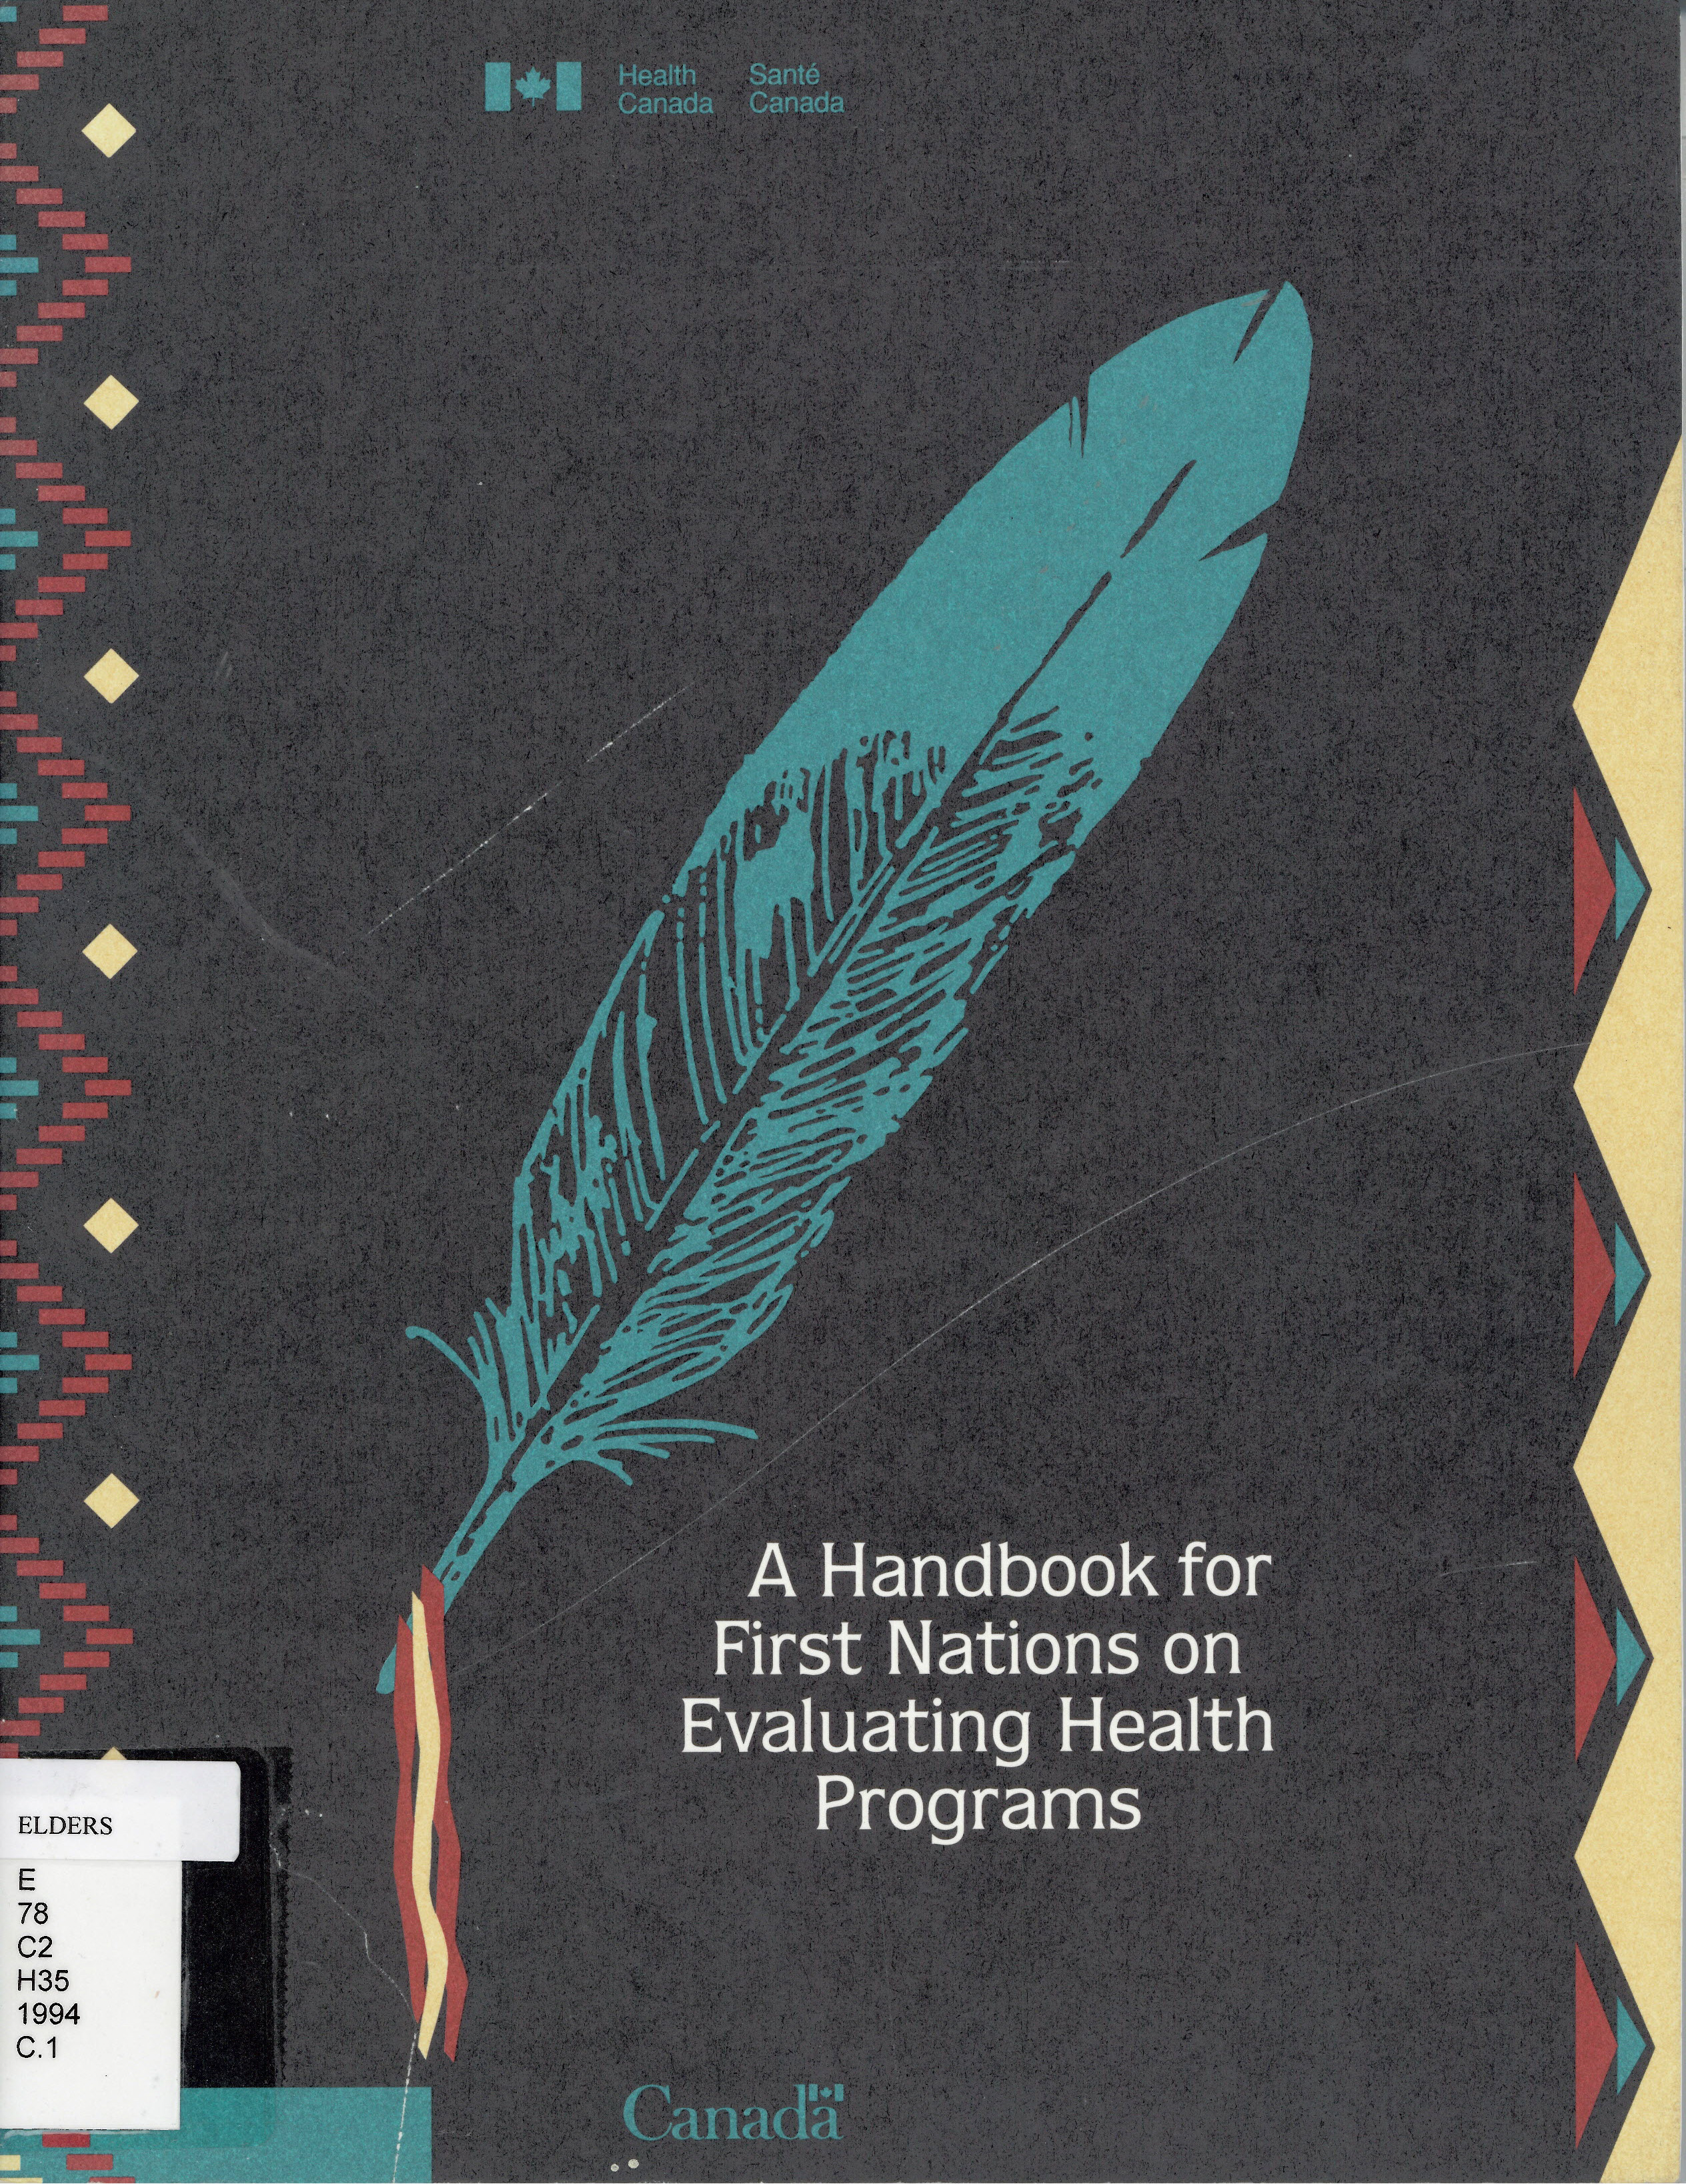 A handbook for First Nations on evaluating health programs.